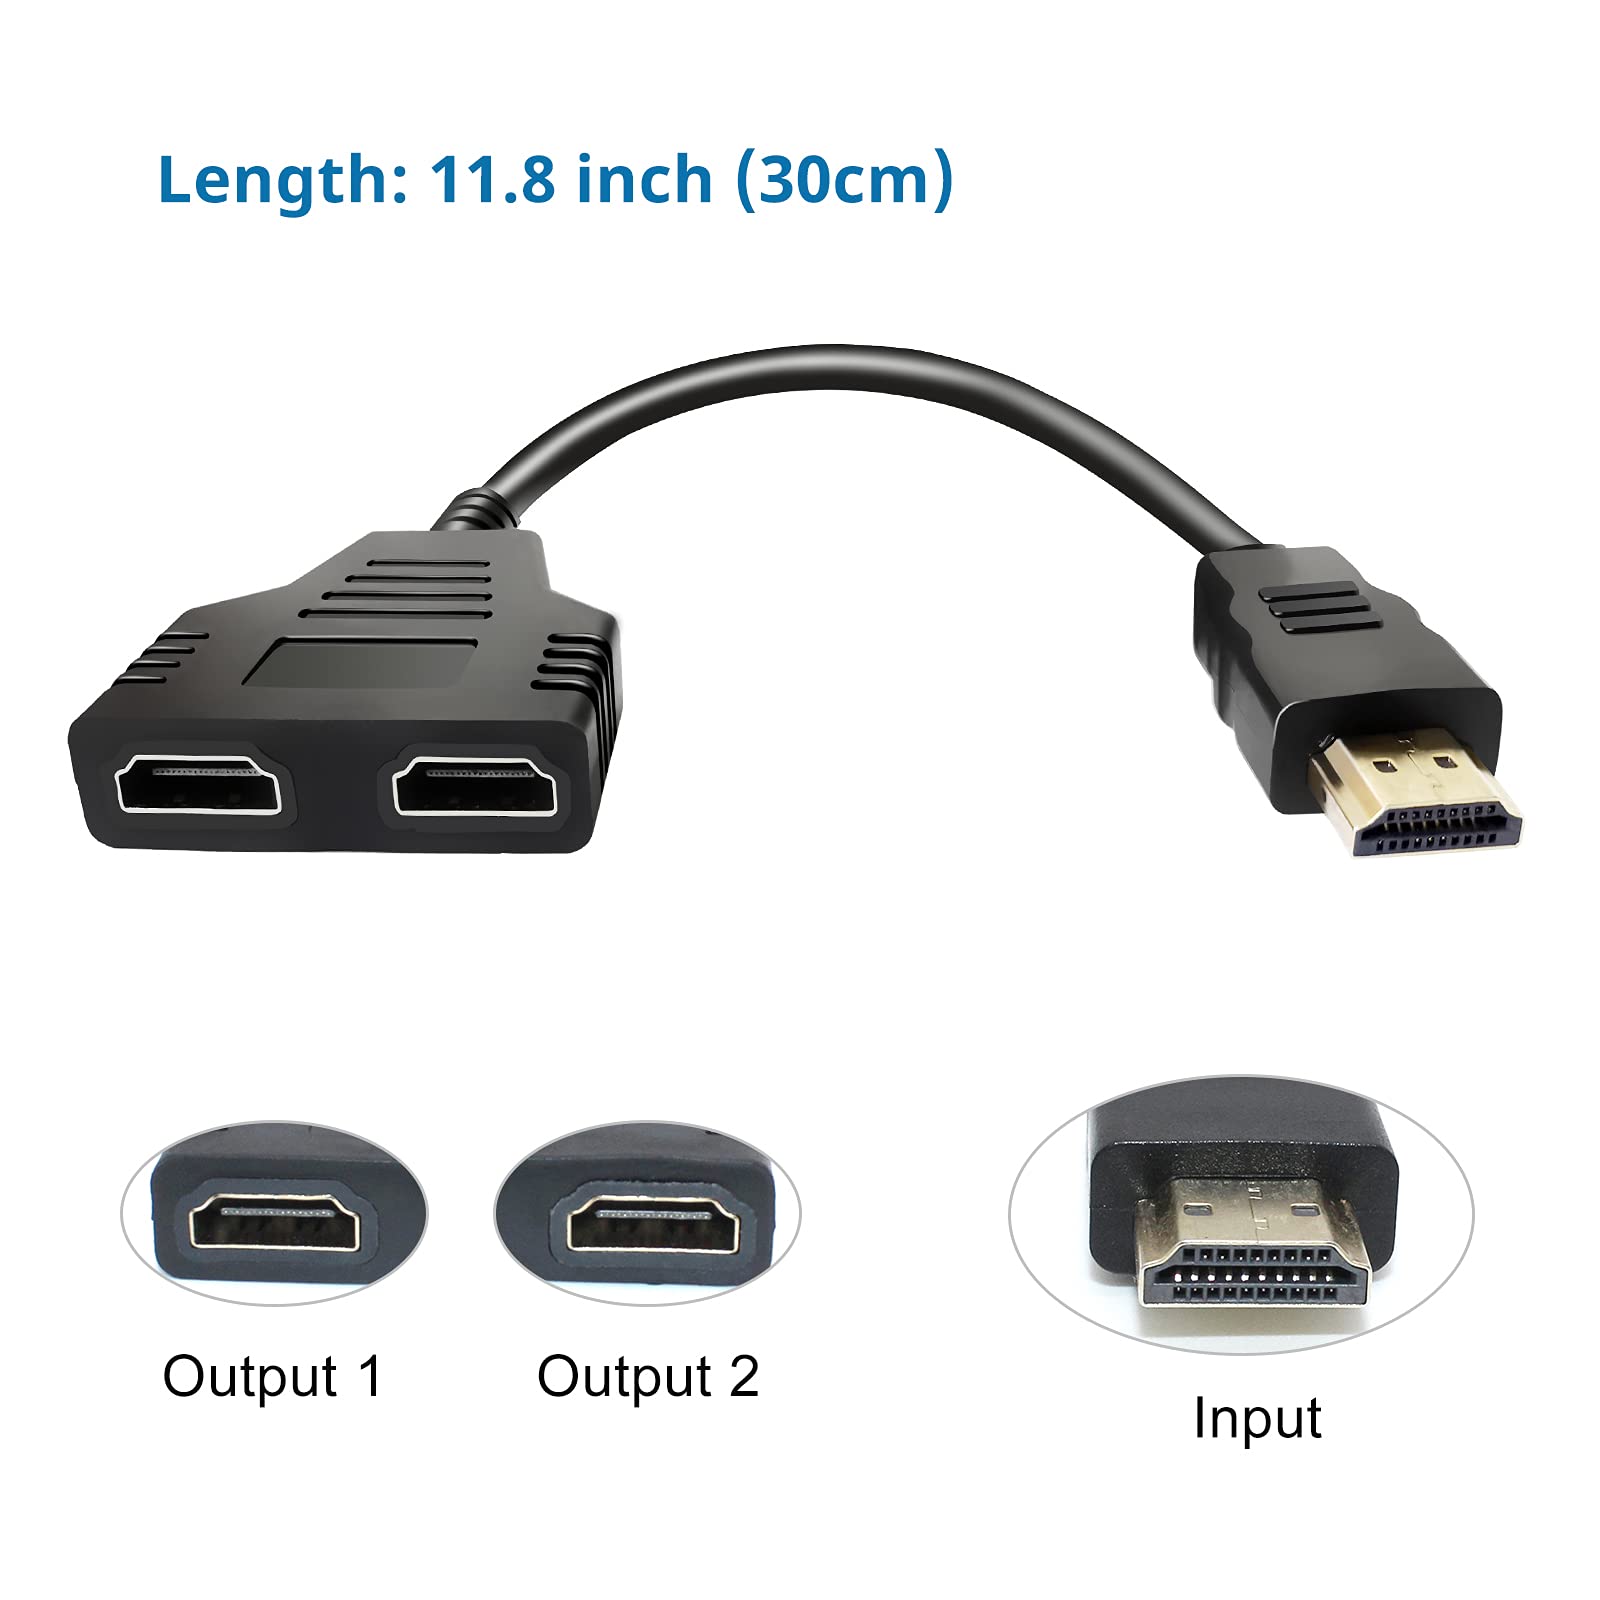 HDMI Splitter Adapter Cable - HDMI Splitter 1 in 2 Out/HDMI Male to Dual HDMI Female 1 to 2 Way for HDMI HD, LED, LCD, TV, Support Two TVs at The Same Time